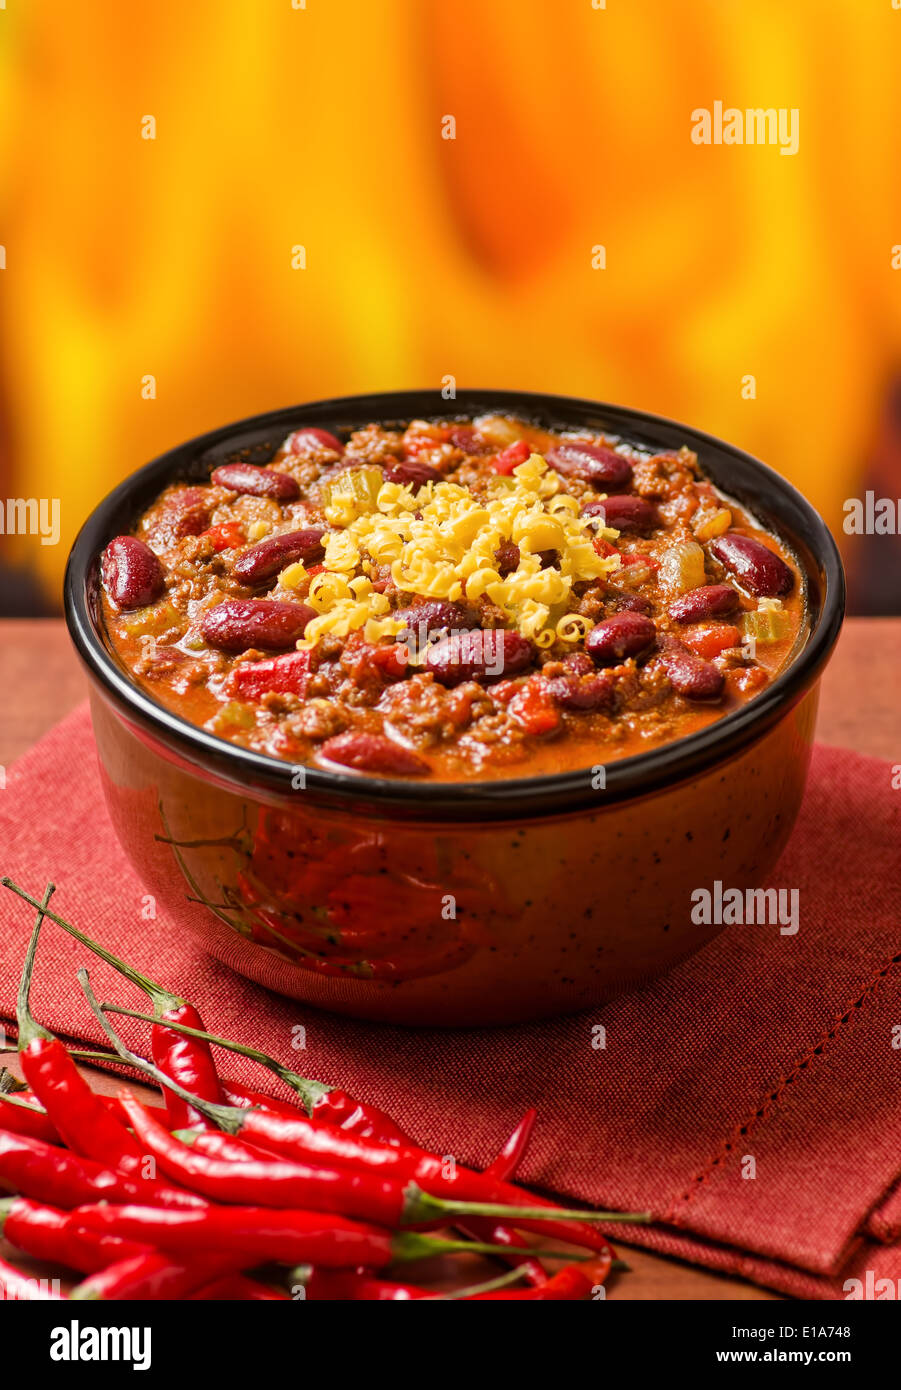 A hearty bowl of chili con carne with hot peppers. Stock Photo